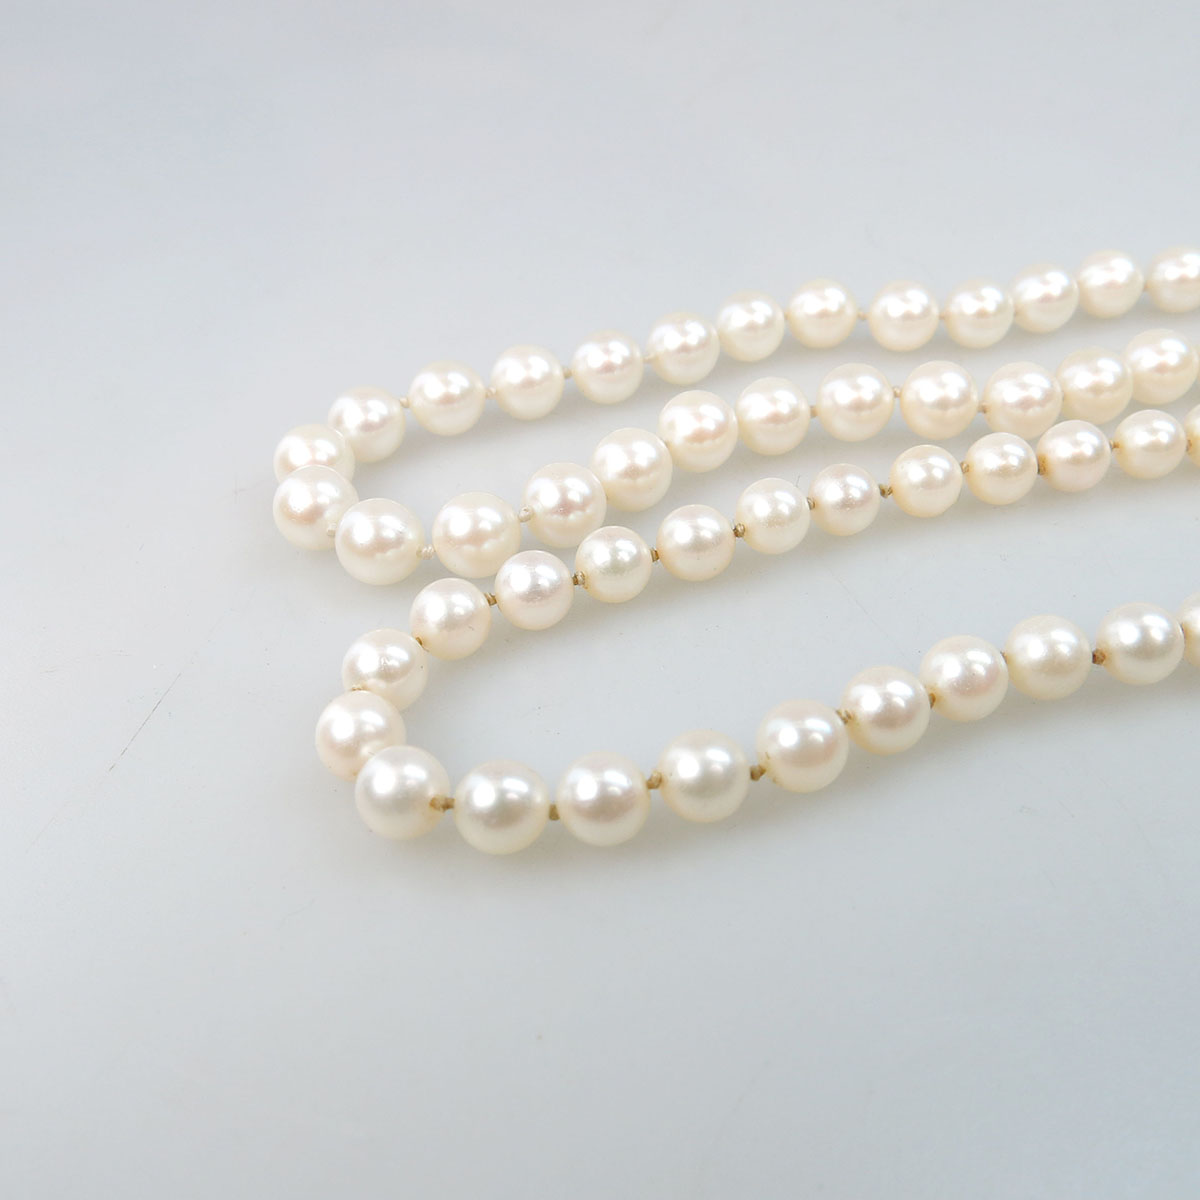 2 Single Strand Cultured Pearls Necklaces